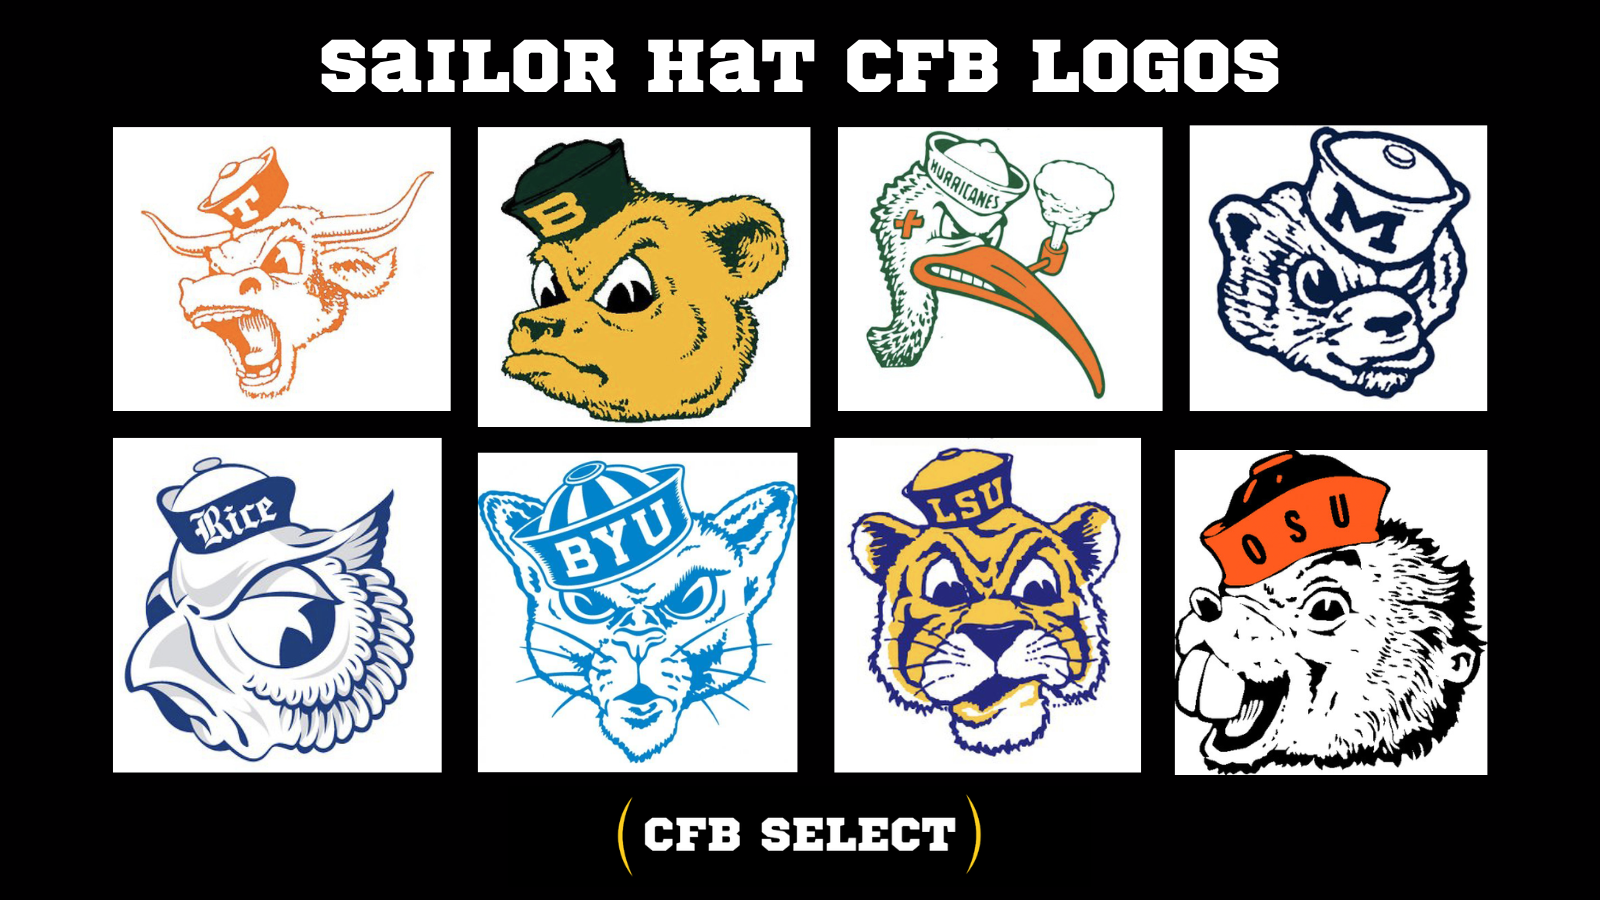 Why Did So Many College Football Mascots Have Sailor Hats?